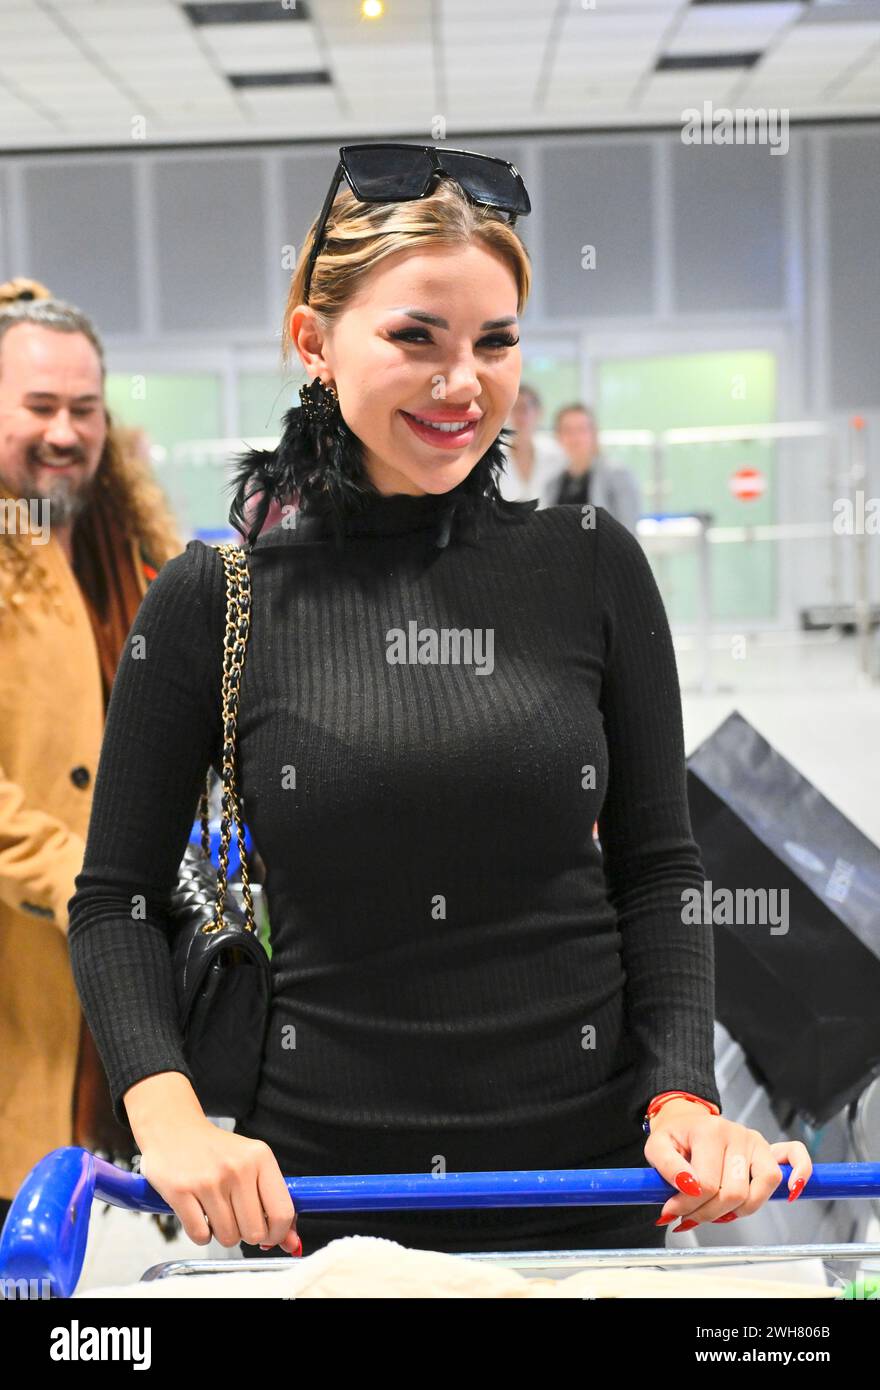 Kim Virginia Hartung on the occasion of the arrival of the candidates of the RTL show, ' Ich bin ein Star holt mich hier raus' from the Jungle Camp 2024 in Australia FRANKFURT am MAIN Airport, 7. February 2024; RTL - Dschungelcamp 2024, return of the participants and arrival at Frankfurt Airport, Arrival of the candidates of the RTL show. 'Ich bin ein Star - holt mich hier raus' from the Jungle Camp 2024 held in Australia - picture at Frankfurt/Main Airport. - entertainment, show, people, (Photo by Jerry ANDRE/ATPImages) (ANDRE Jerry/ATP/SPP) Credit: SPP Sport Press Photo. /Alamy Live News Stock Photo